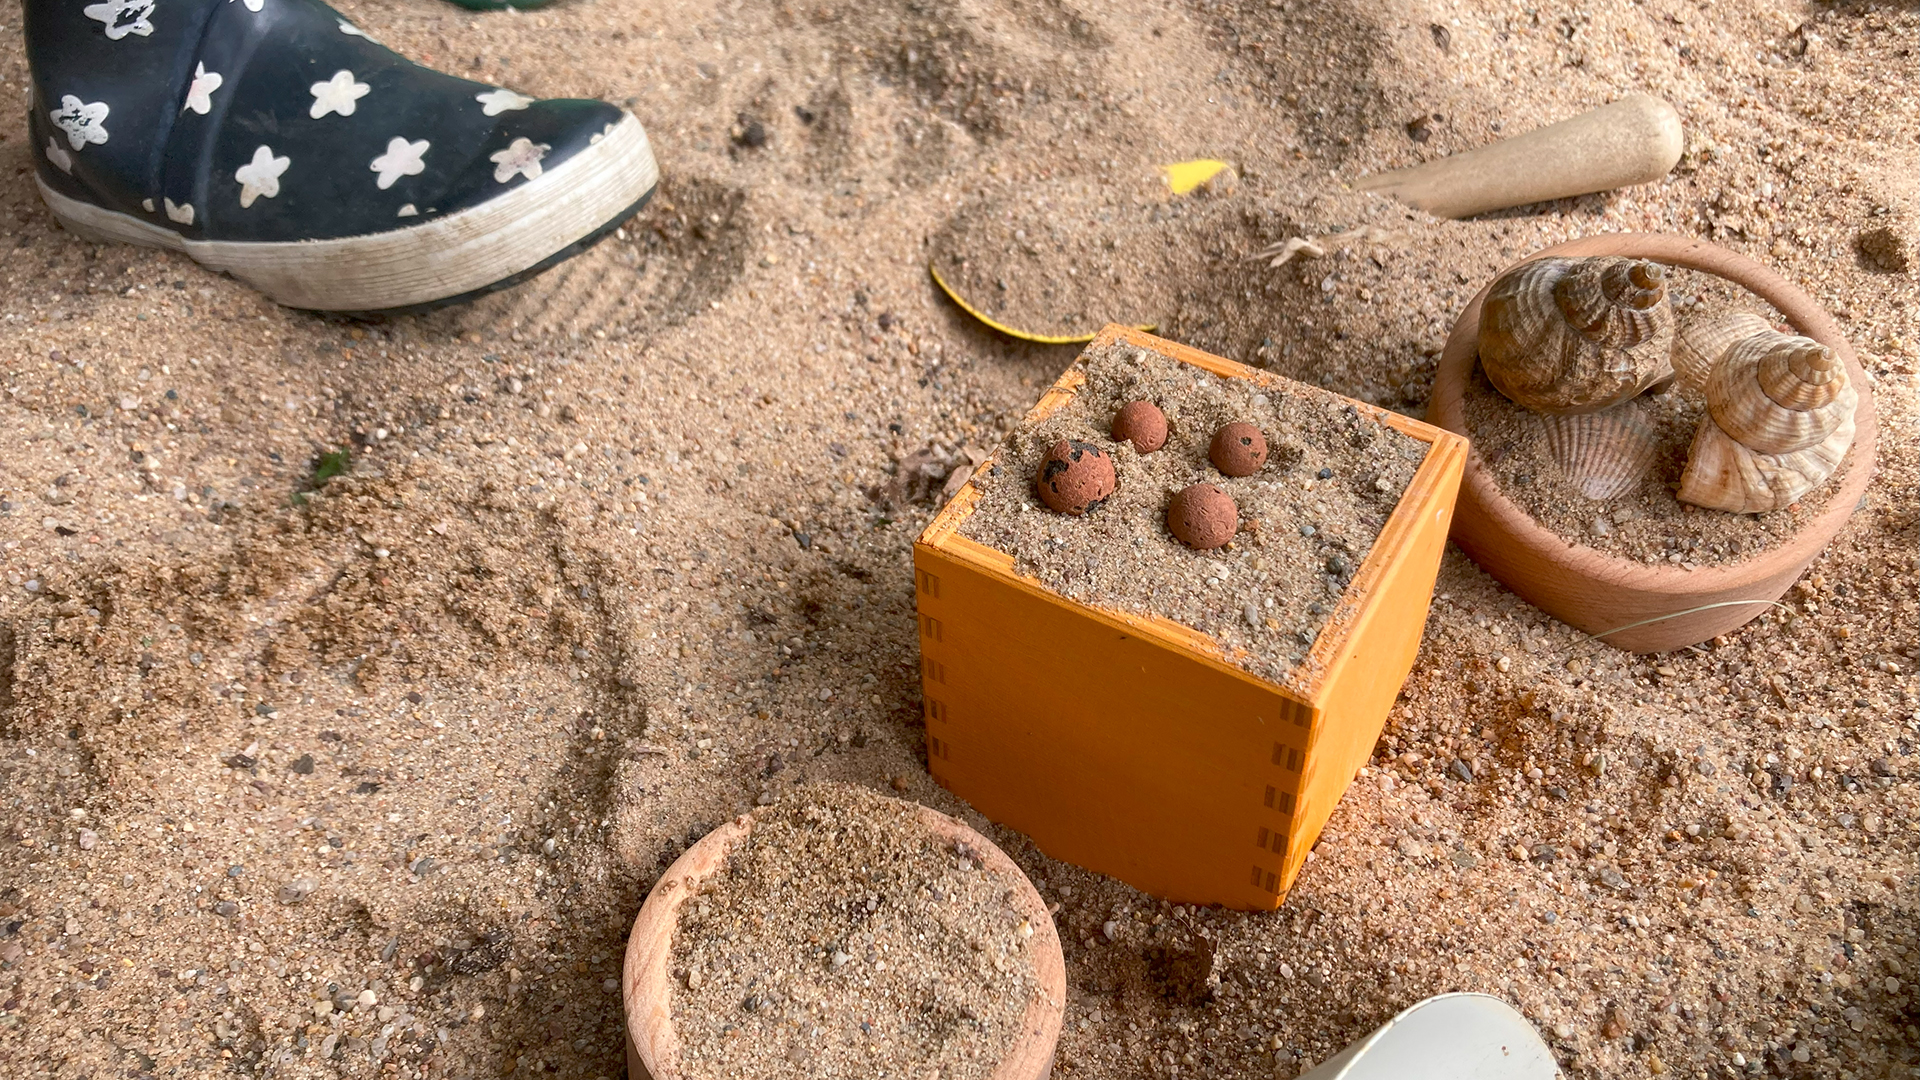 Sand is filled into little wooden bowls and decorated with stones and shells.